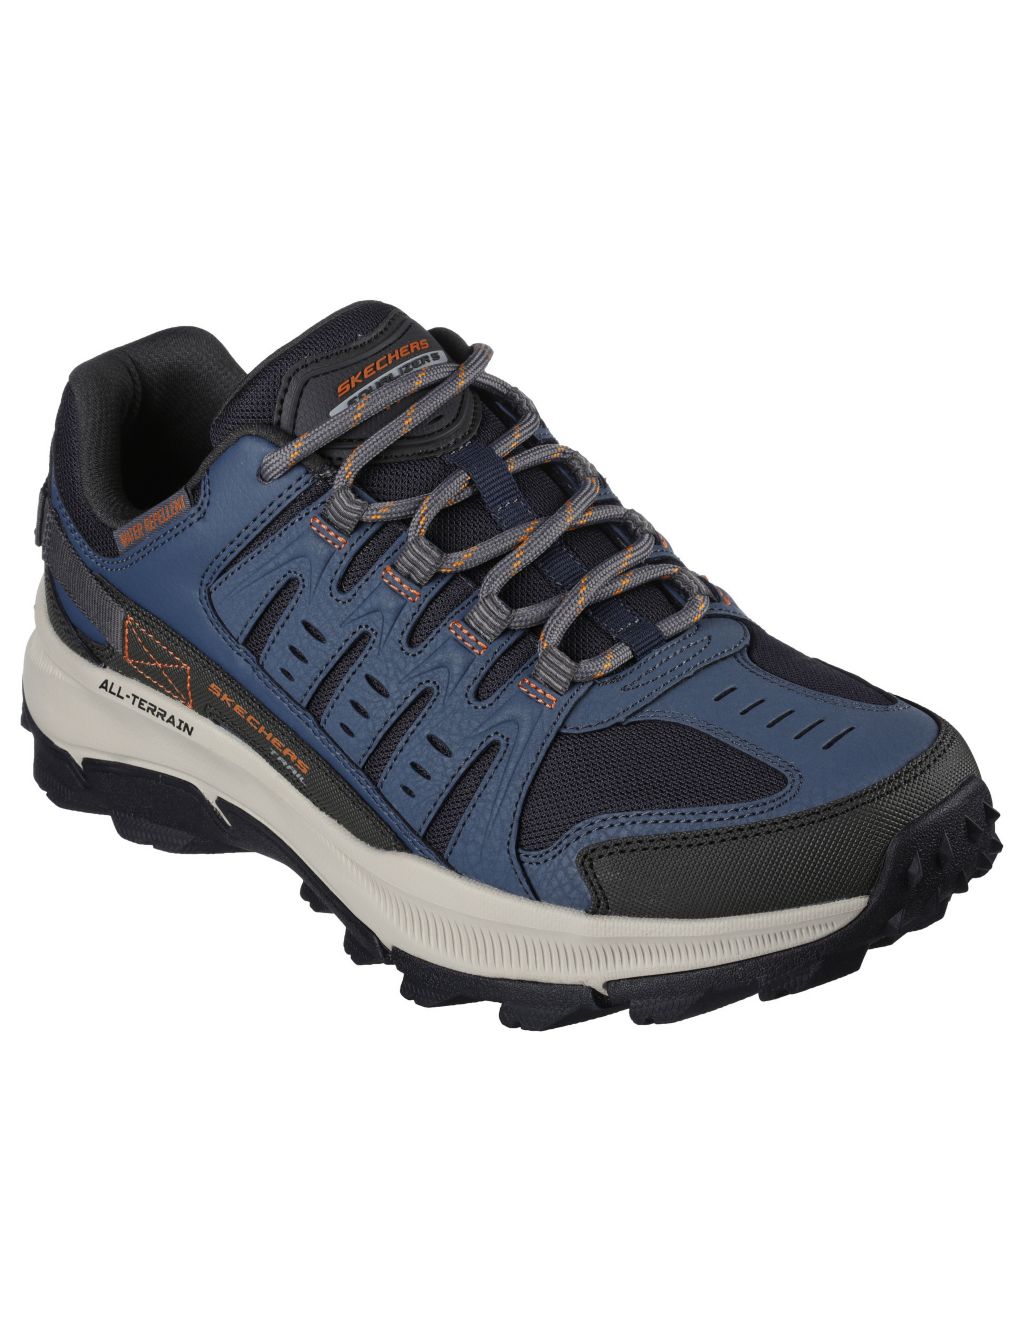 Equalizer 5.0 Trail Solix Lace Up Trainers image 2